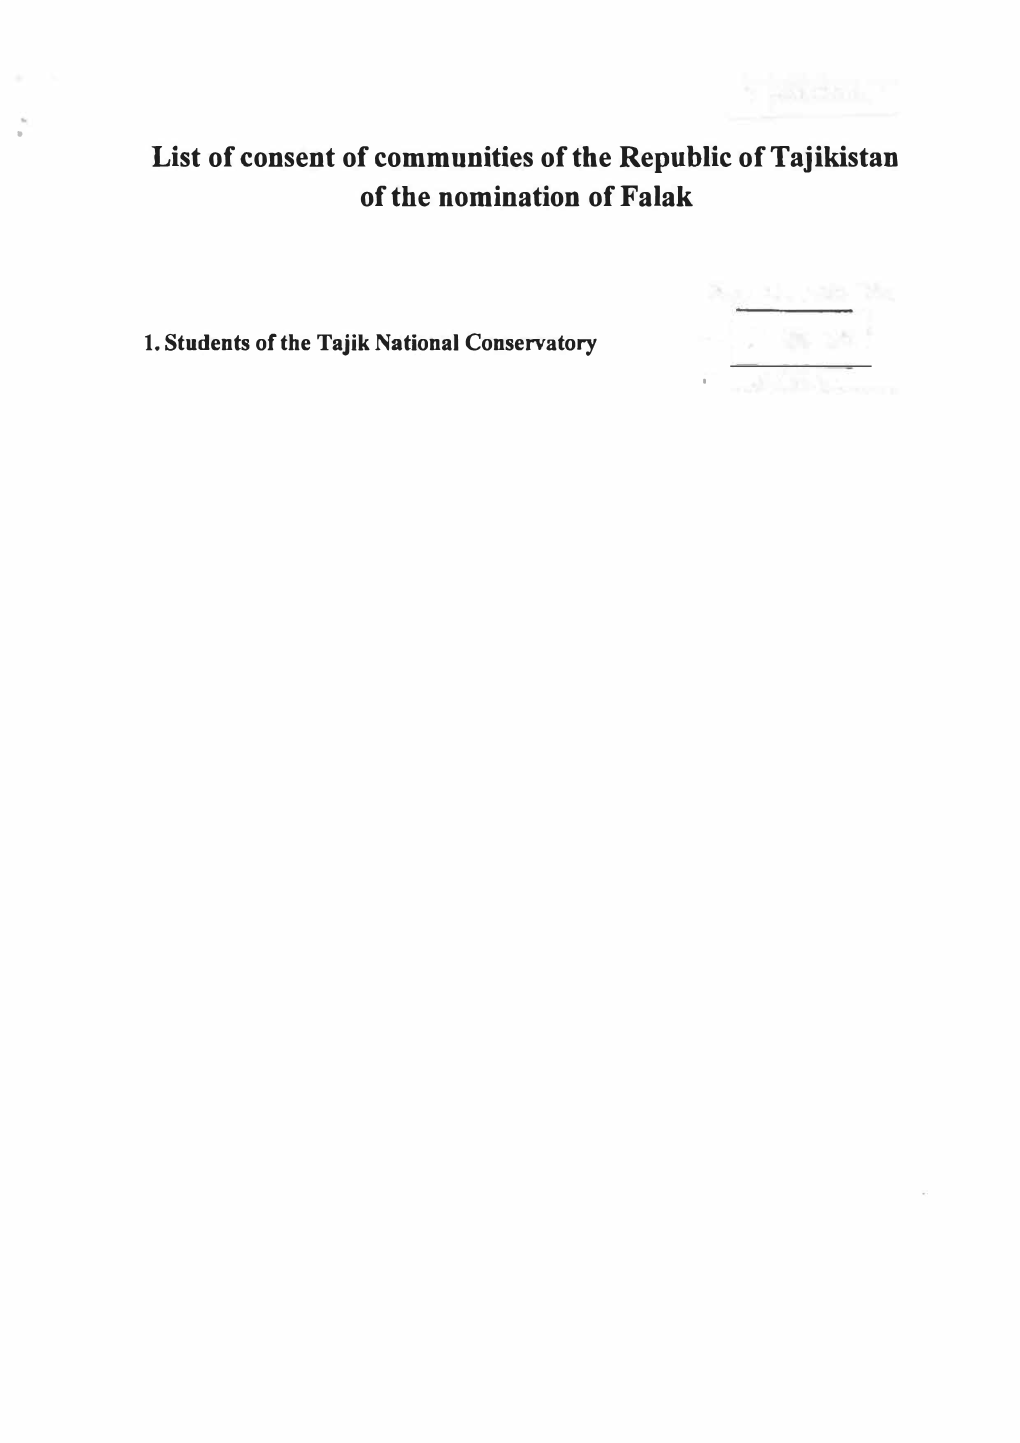 List of Consent of Communities of the Republic of Tajikistan of the Nomination of Falak